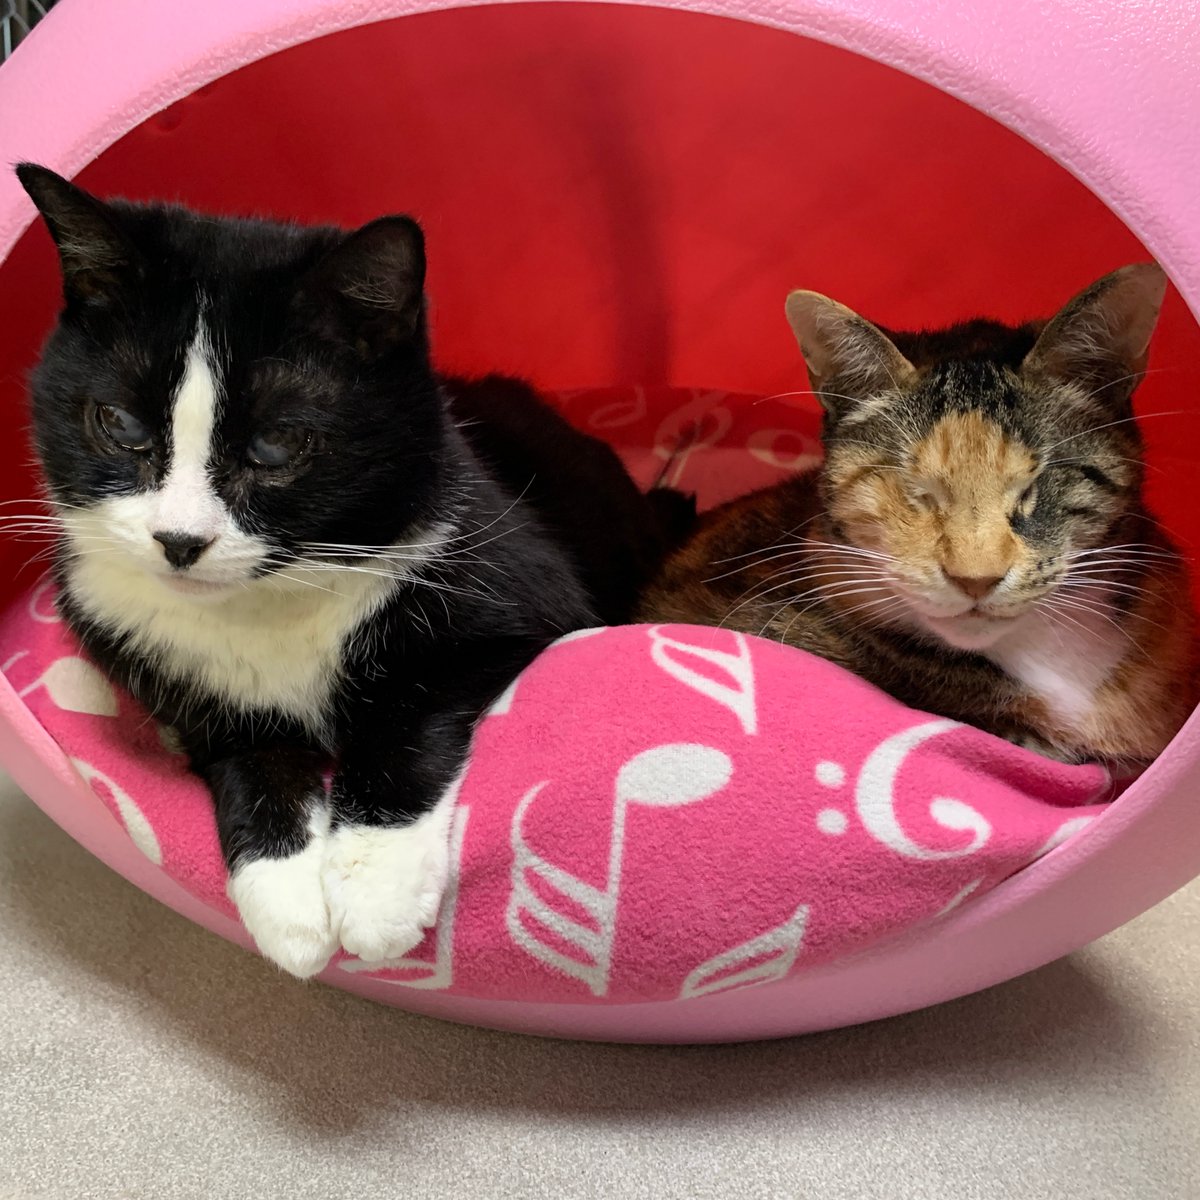 Happy #BestFriendsDay from Izzy & LT! They ask if you can join in by giving to our first-ever worldwide fundraising campaign through GlobalGiving! Help the cats reach their goal of $5k to go towards medical expenses & care!
 
Please click here to help: bit.ly/3Ce2Dqx